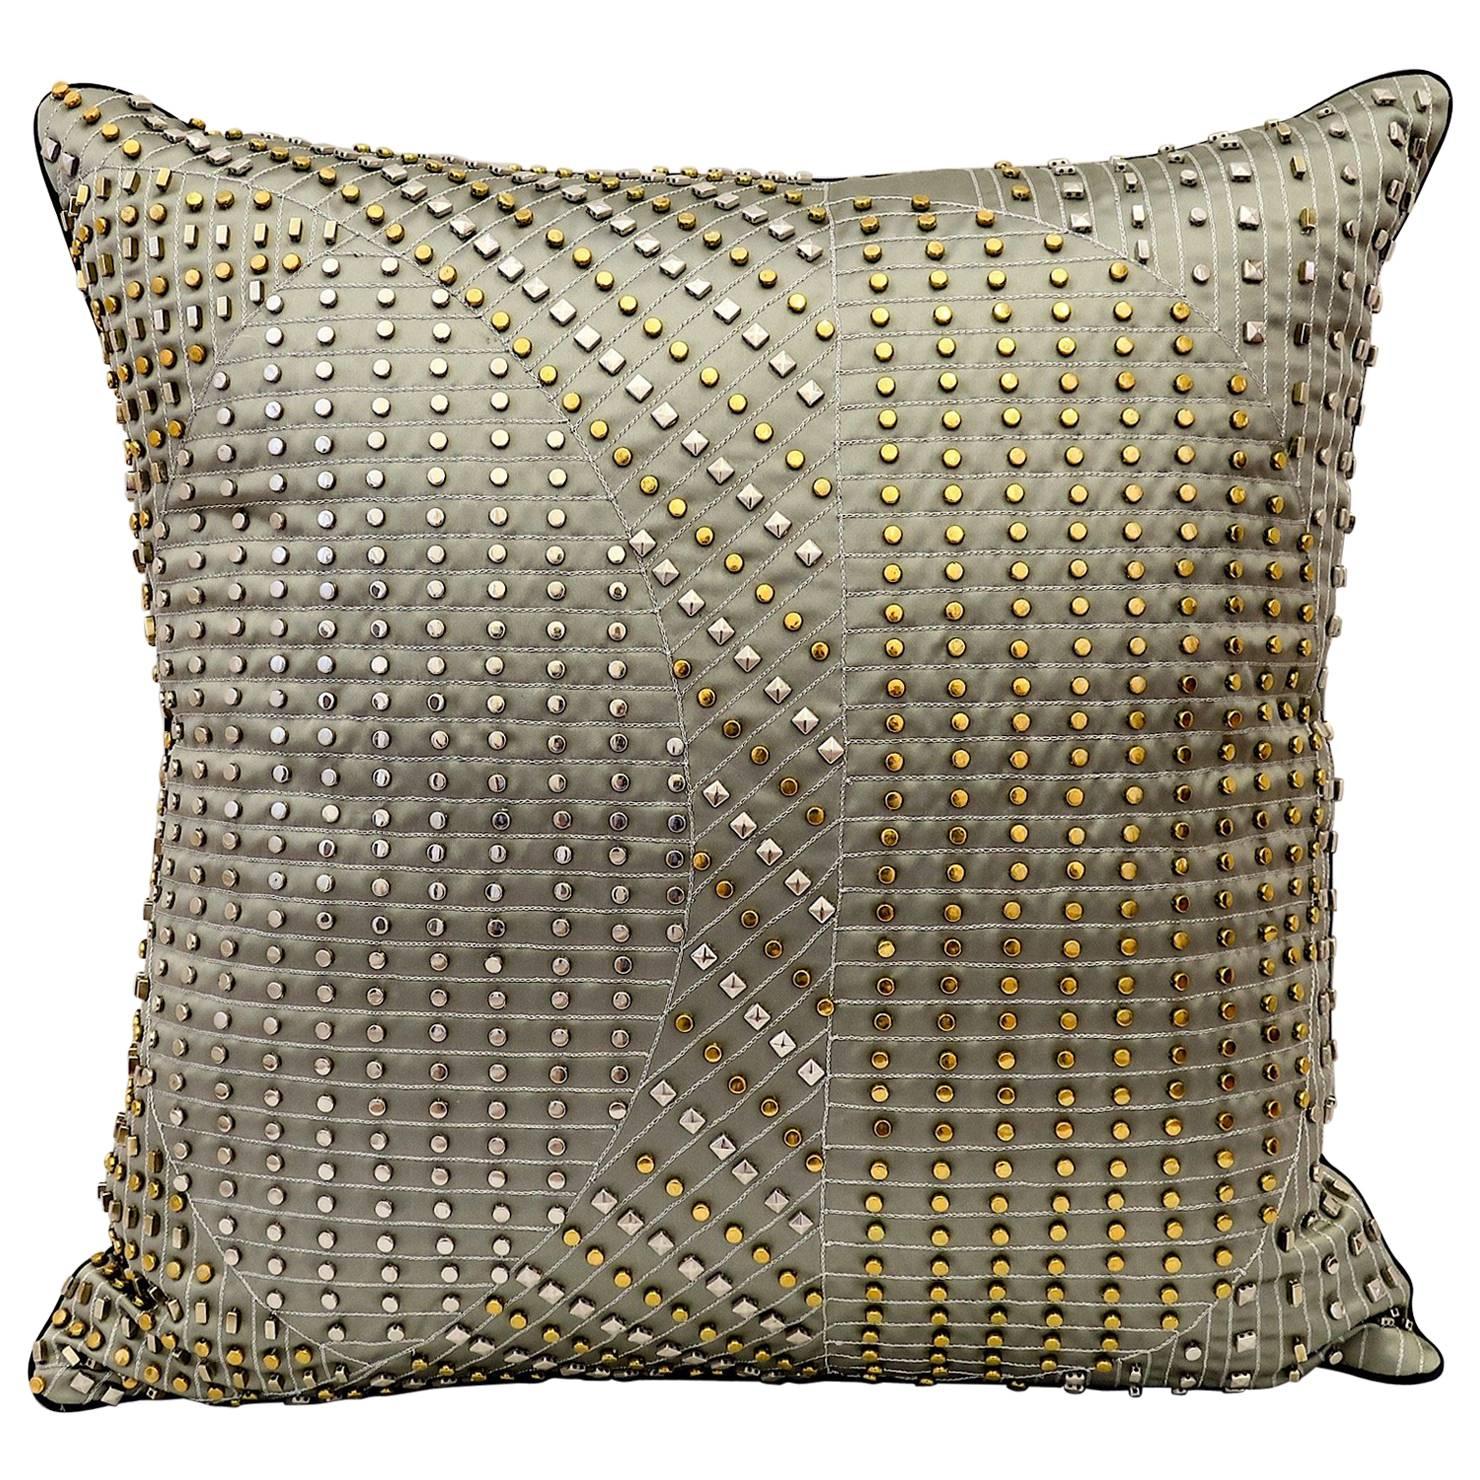 Handcrafted Embroidered Pillow Silver and Gold Metallic on Charcoal Satin For Sale